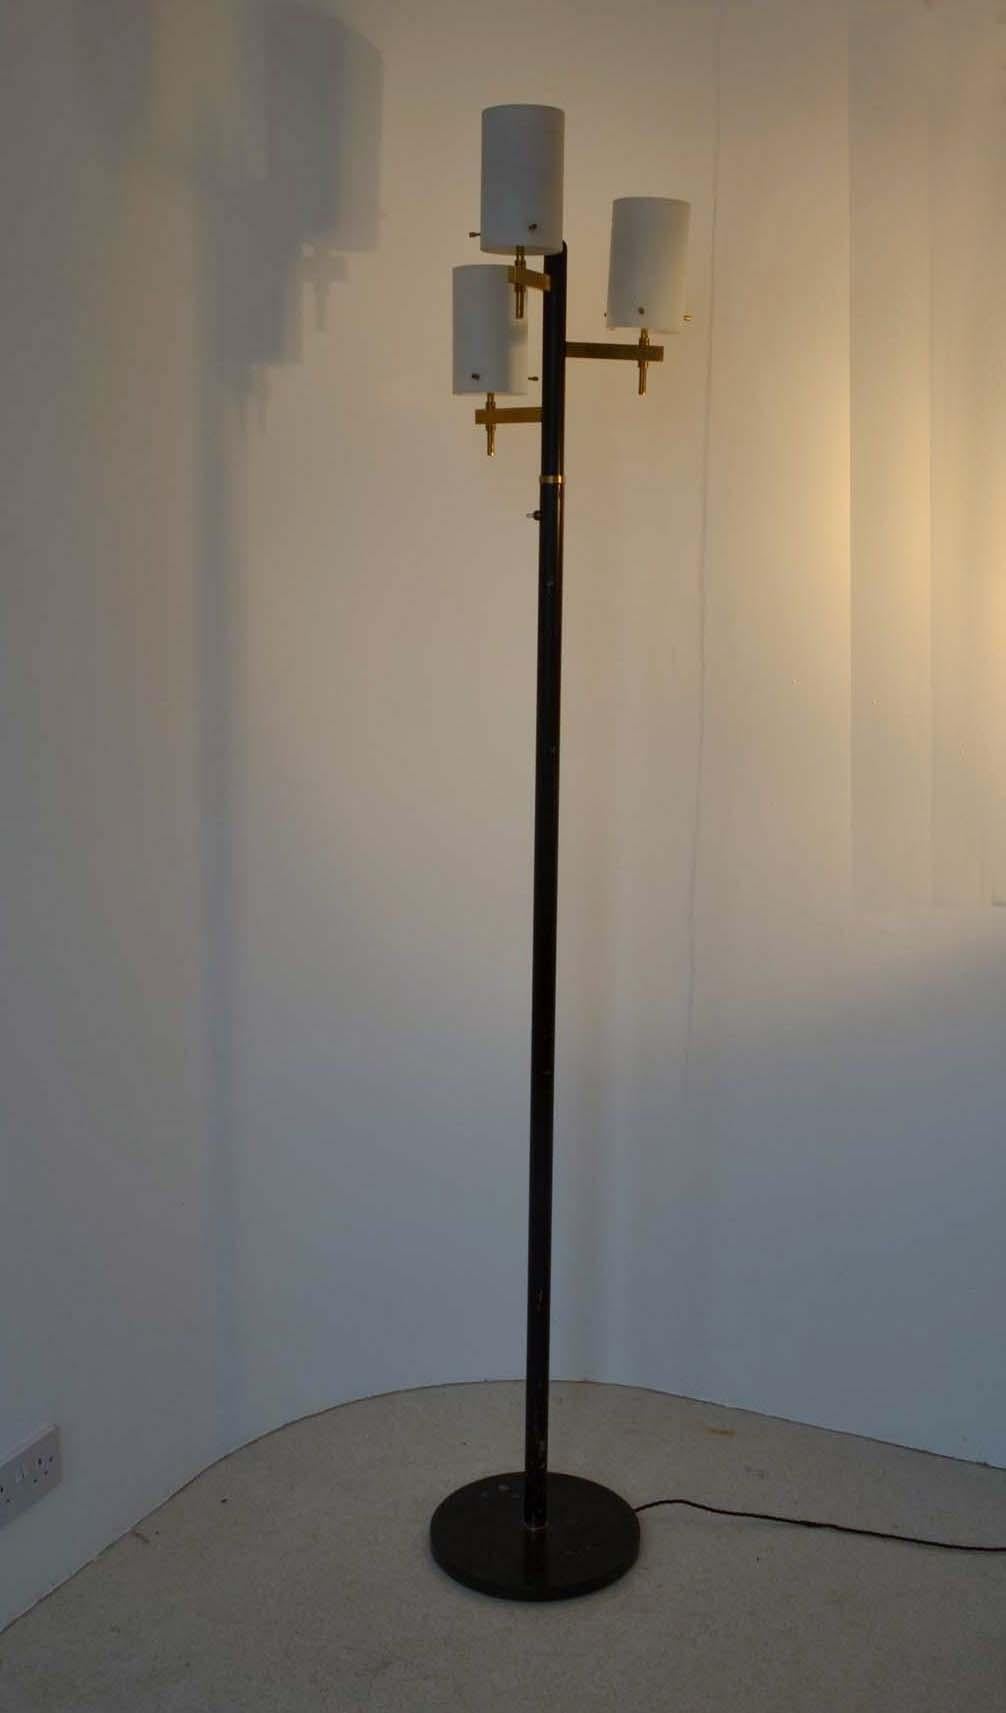 The Italian 1950s floor lamp is attributed to Stilnovo having all the elements associated with the company combining glass, enameled black steel, brass and marble. The three brass arms each hold opaline white cylindrical shades, centered by tall